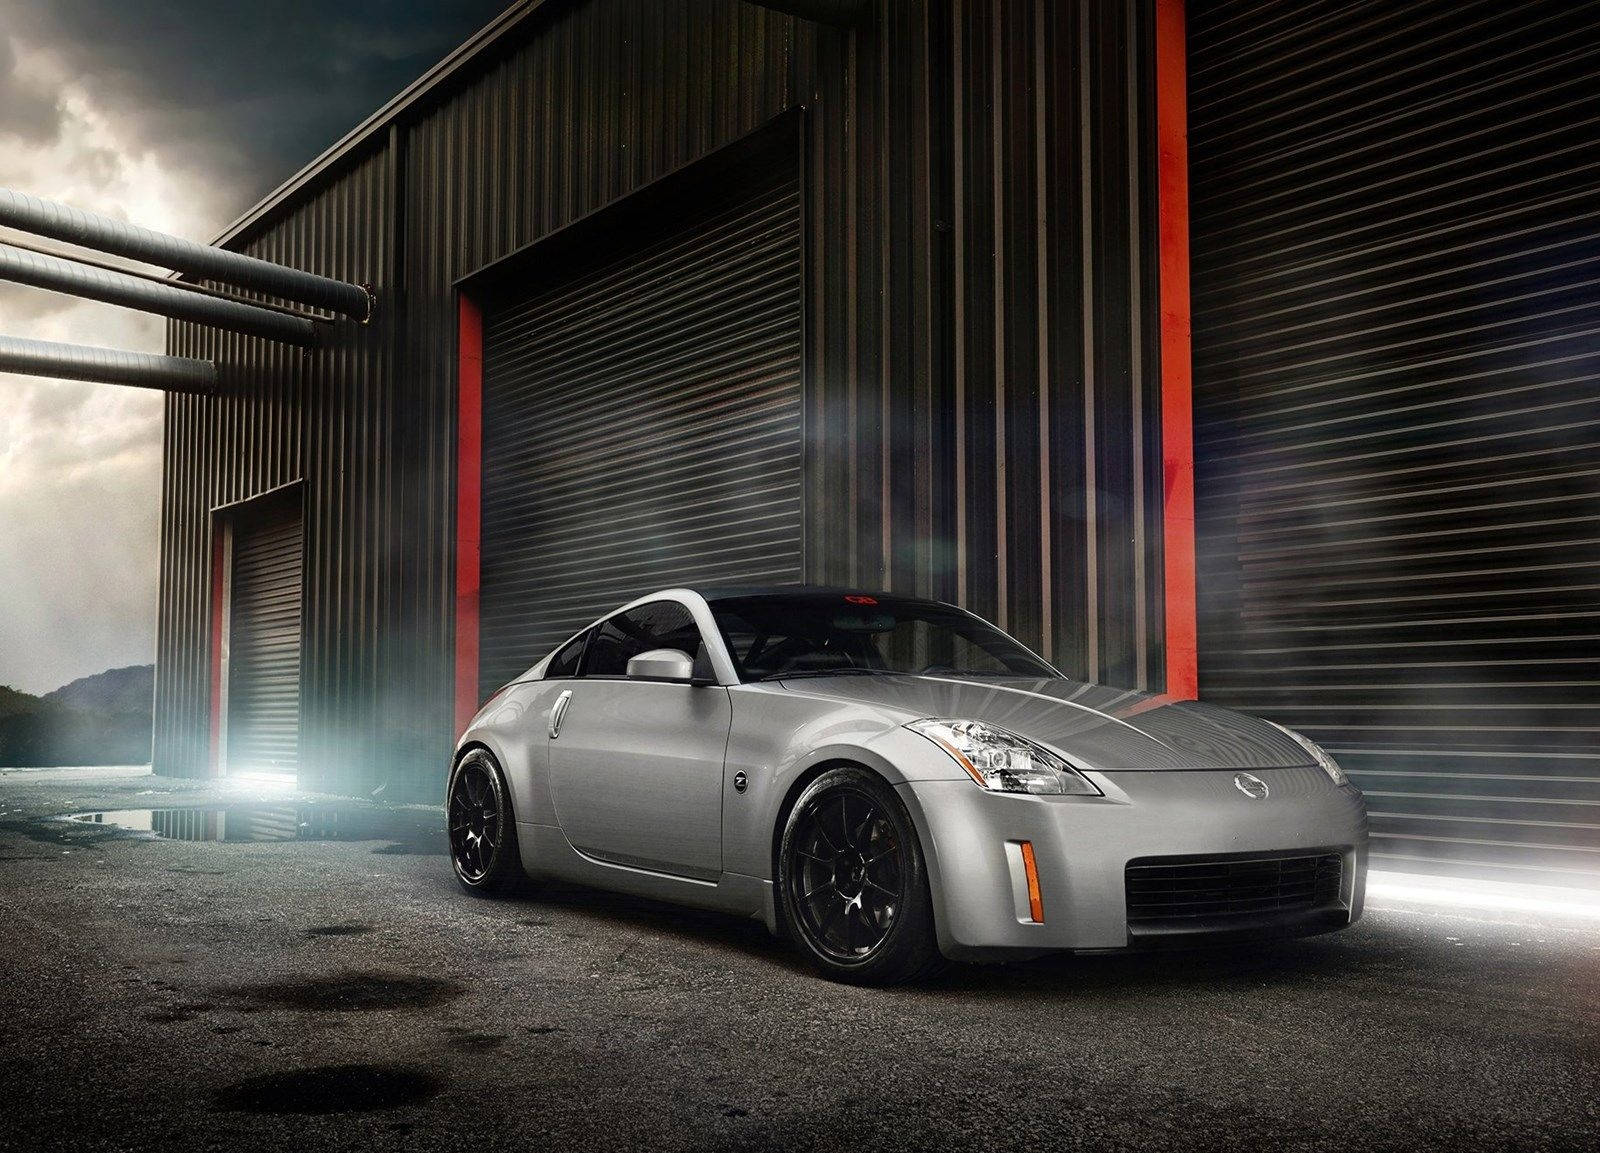 The Iconic Nissan 350z - an Automotive Masterpiece Wallpaper